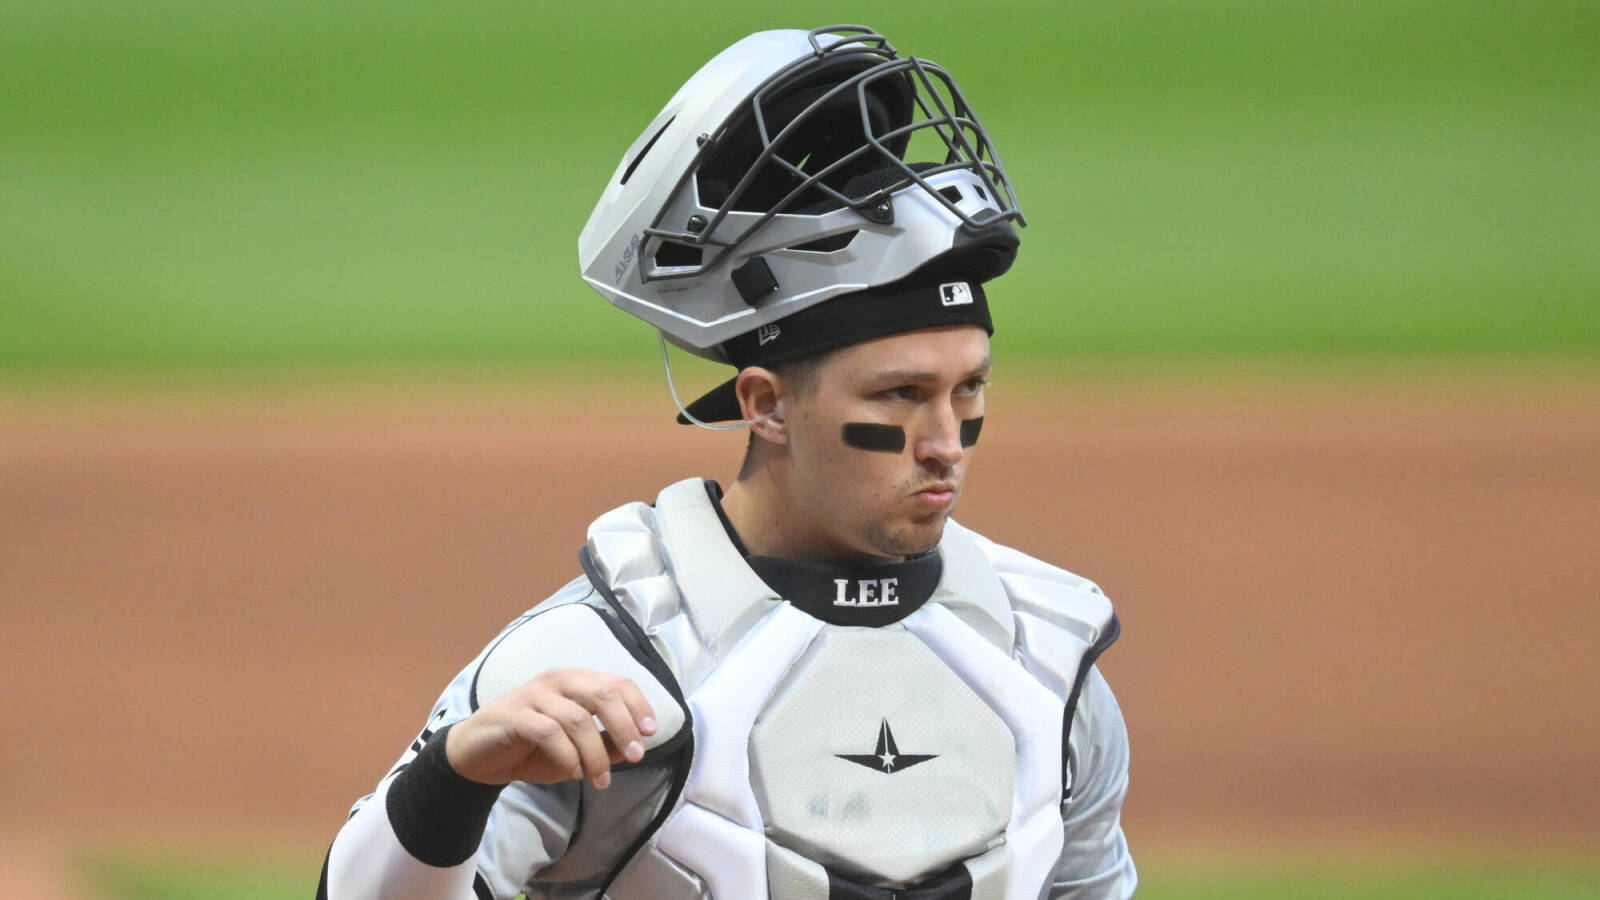 A potential positive development on the White Sox's roster